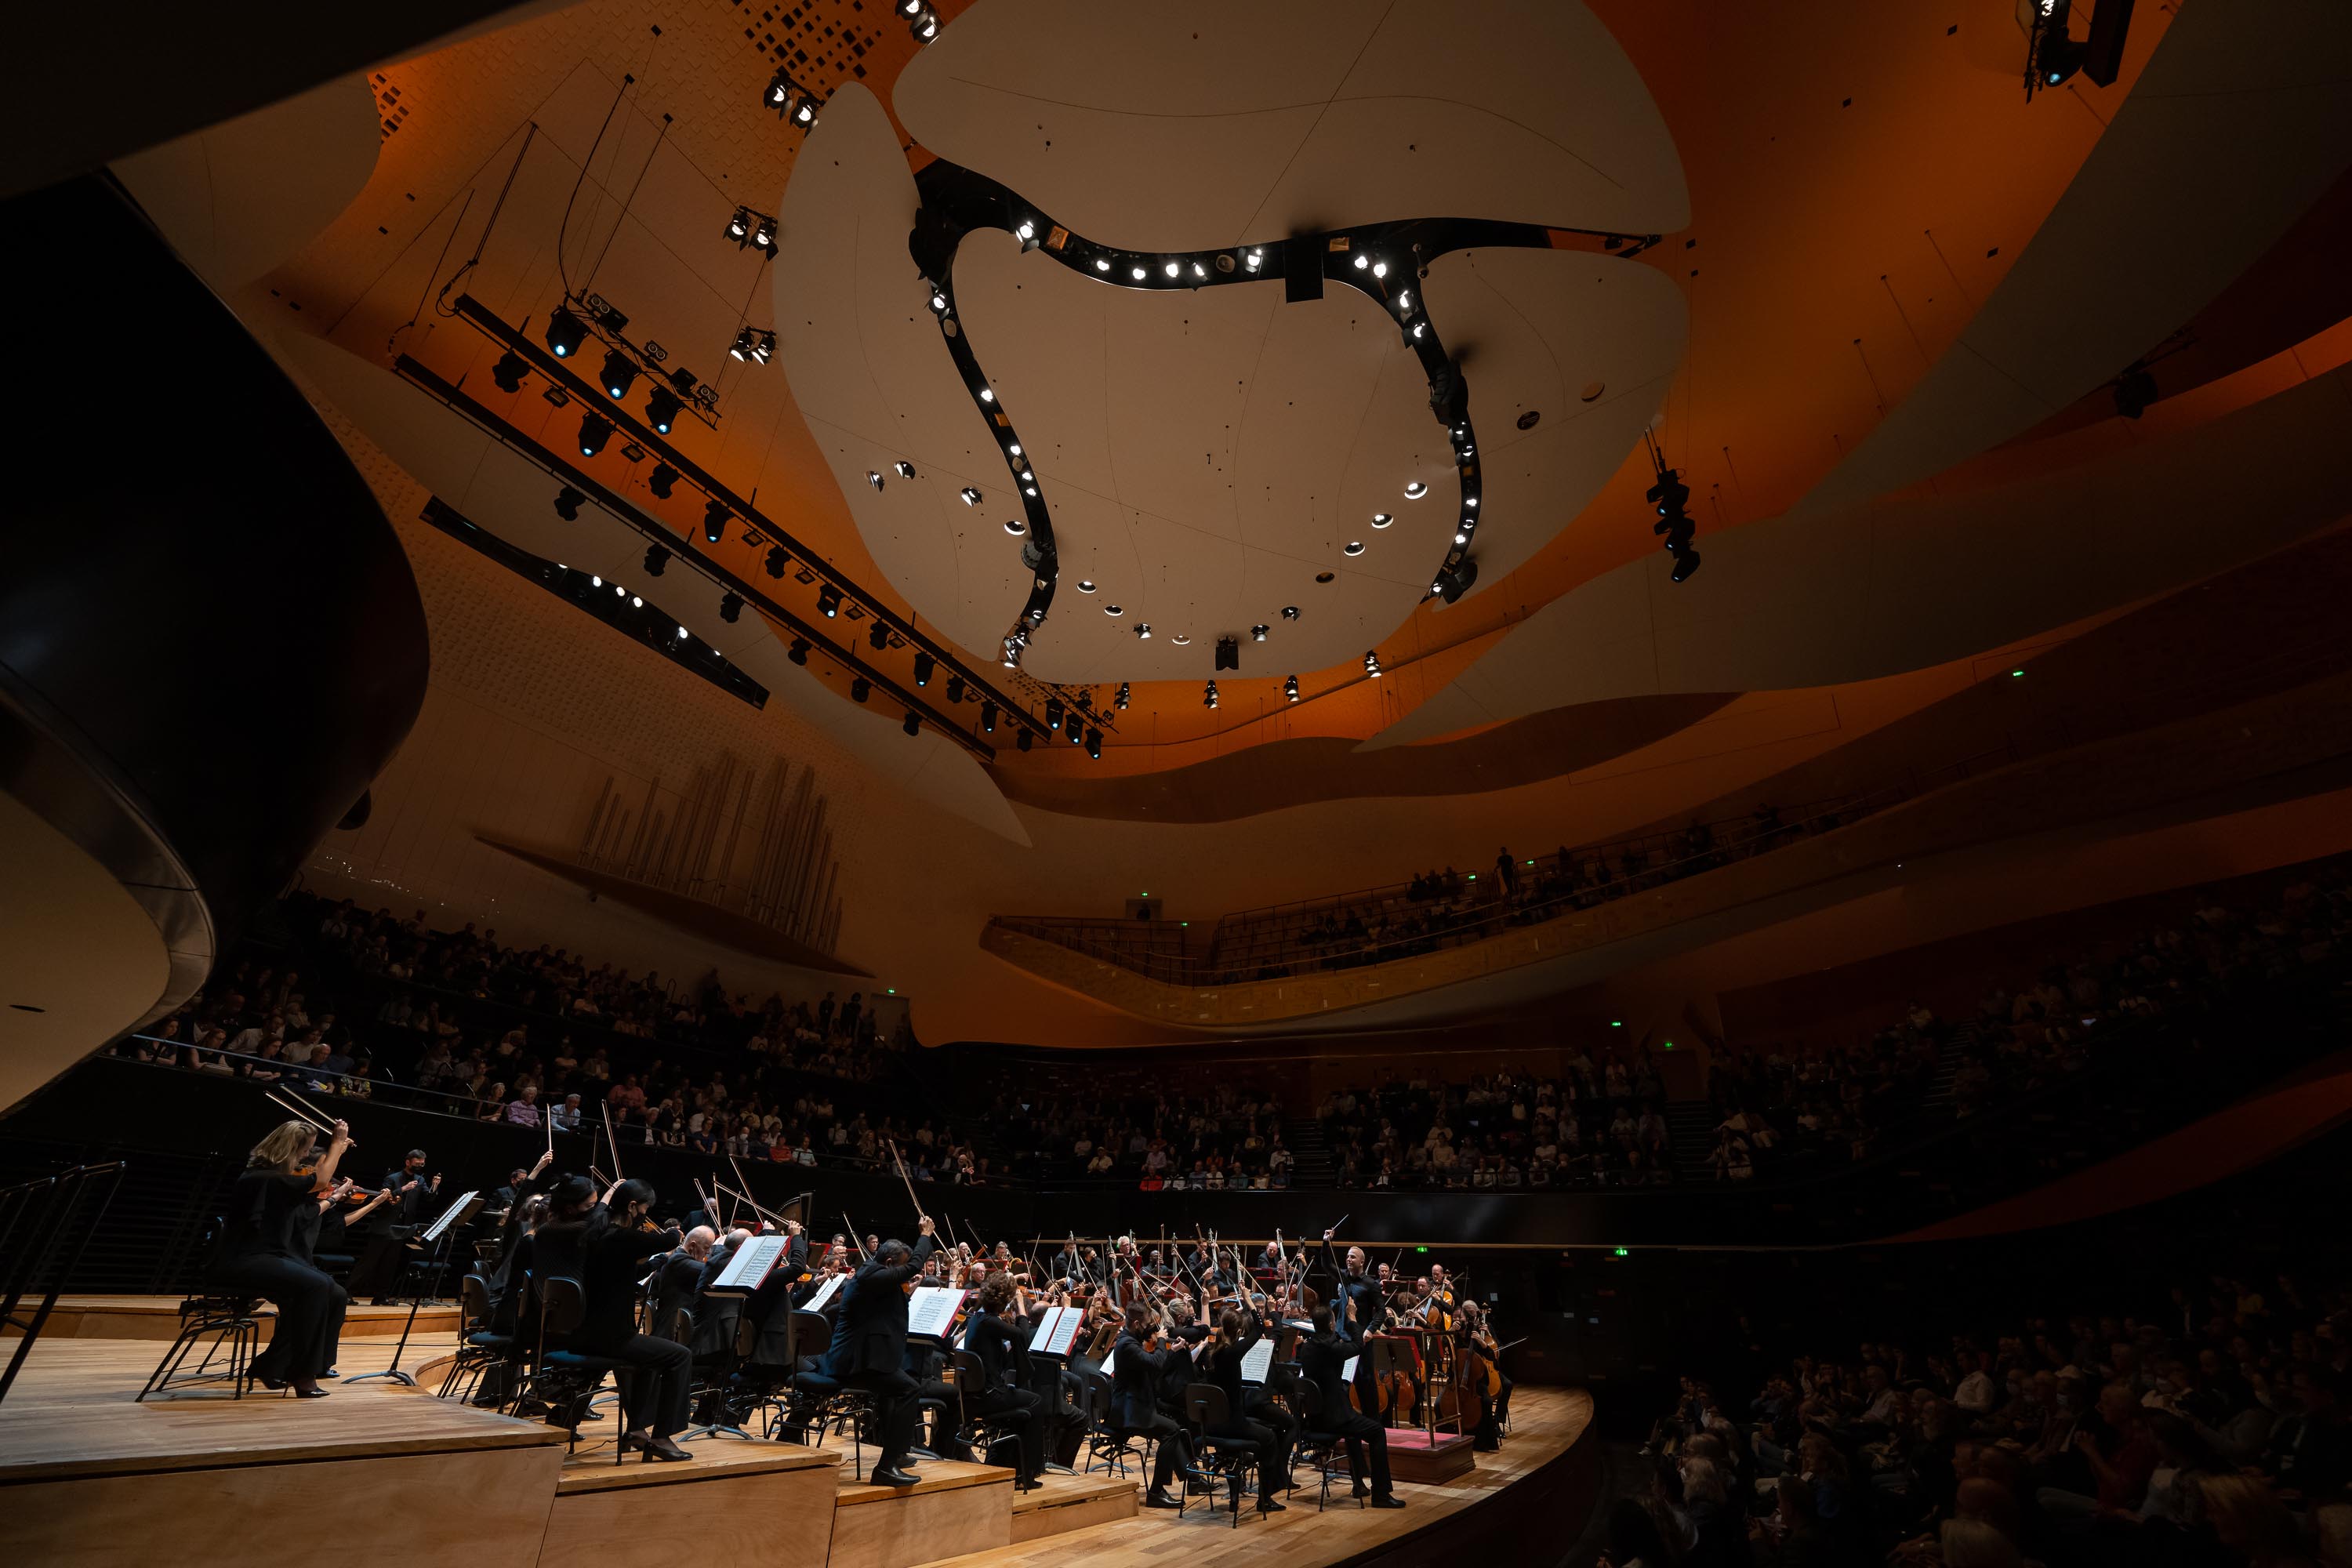 The last strains of the Symphony resound in the Philharmonie